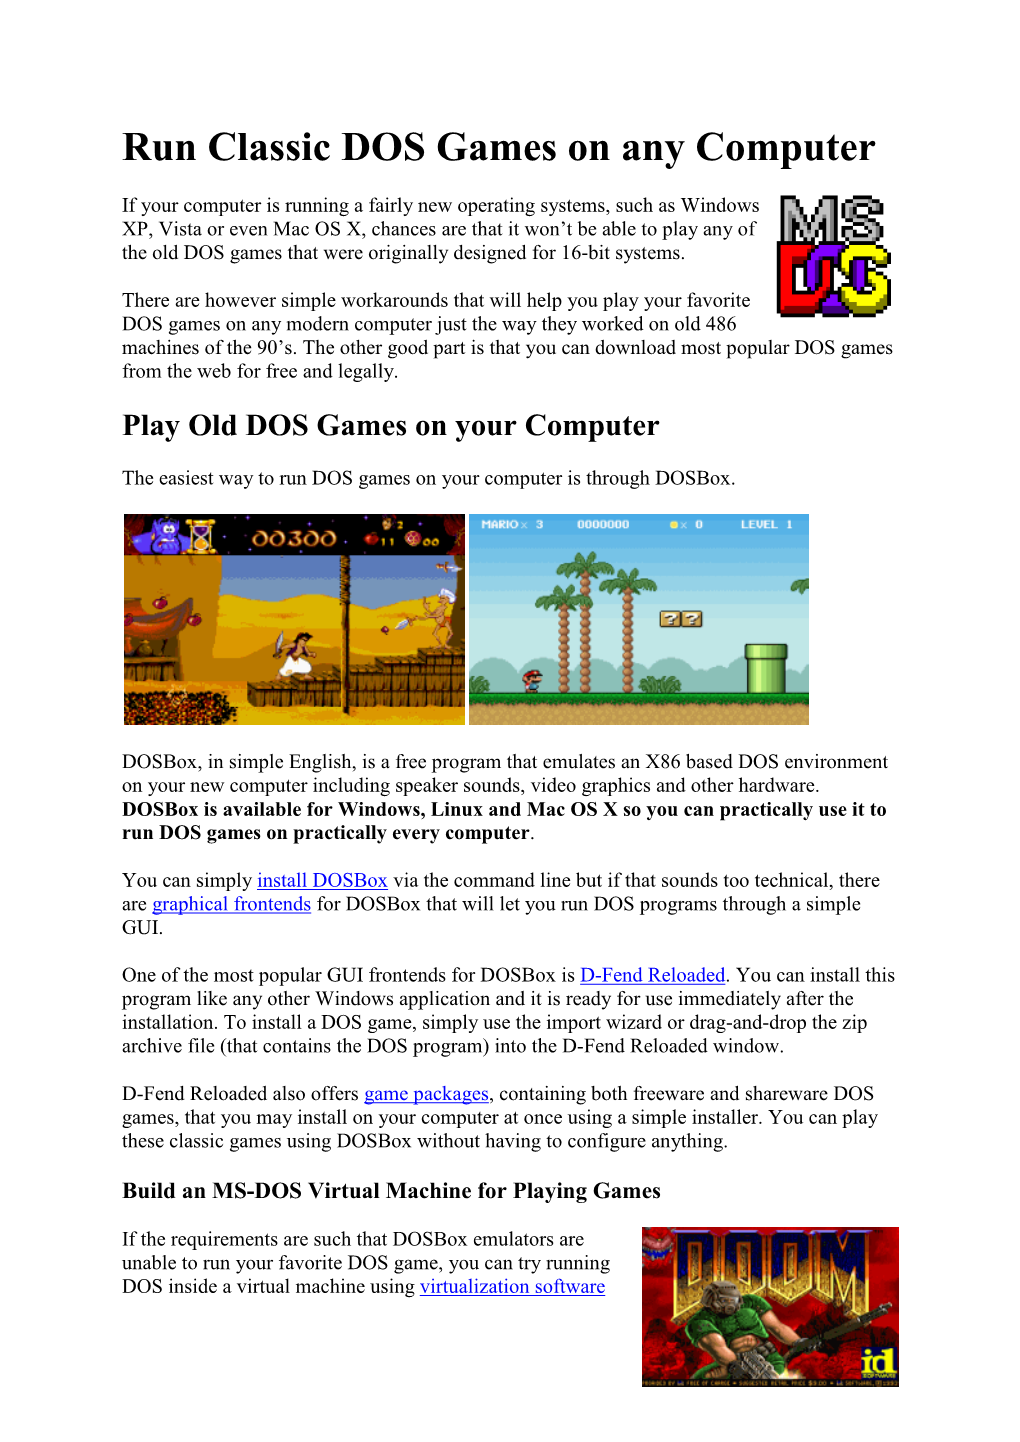 Run Classic DOS Games on Any Computer